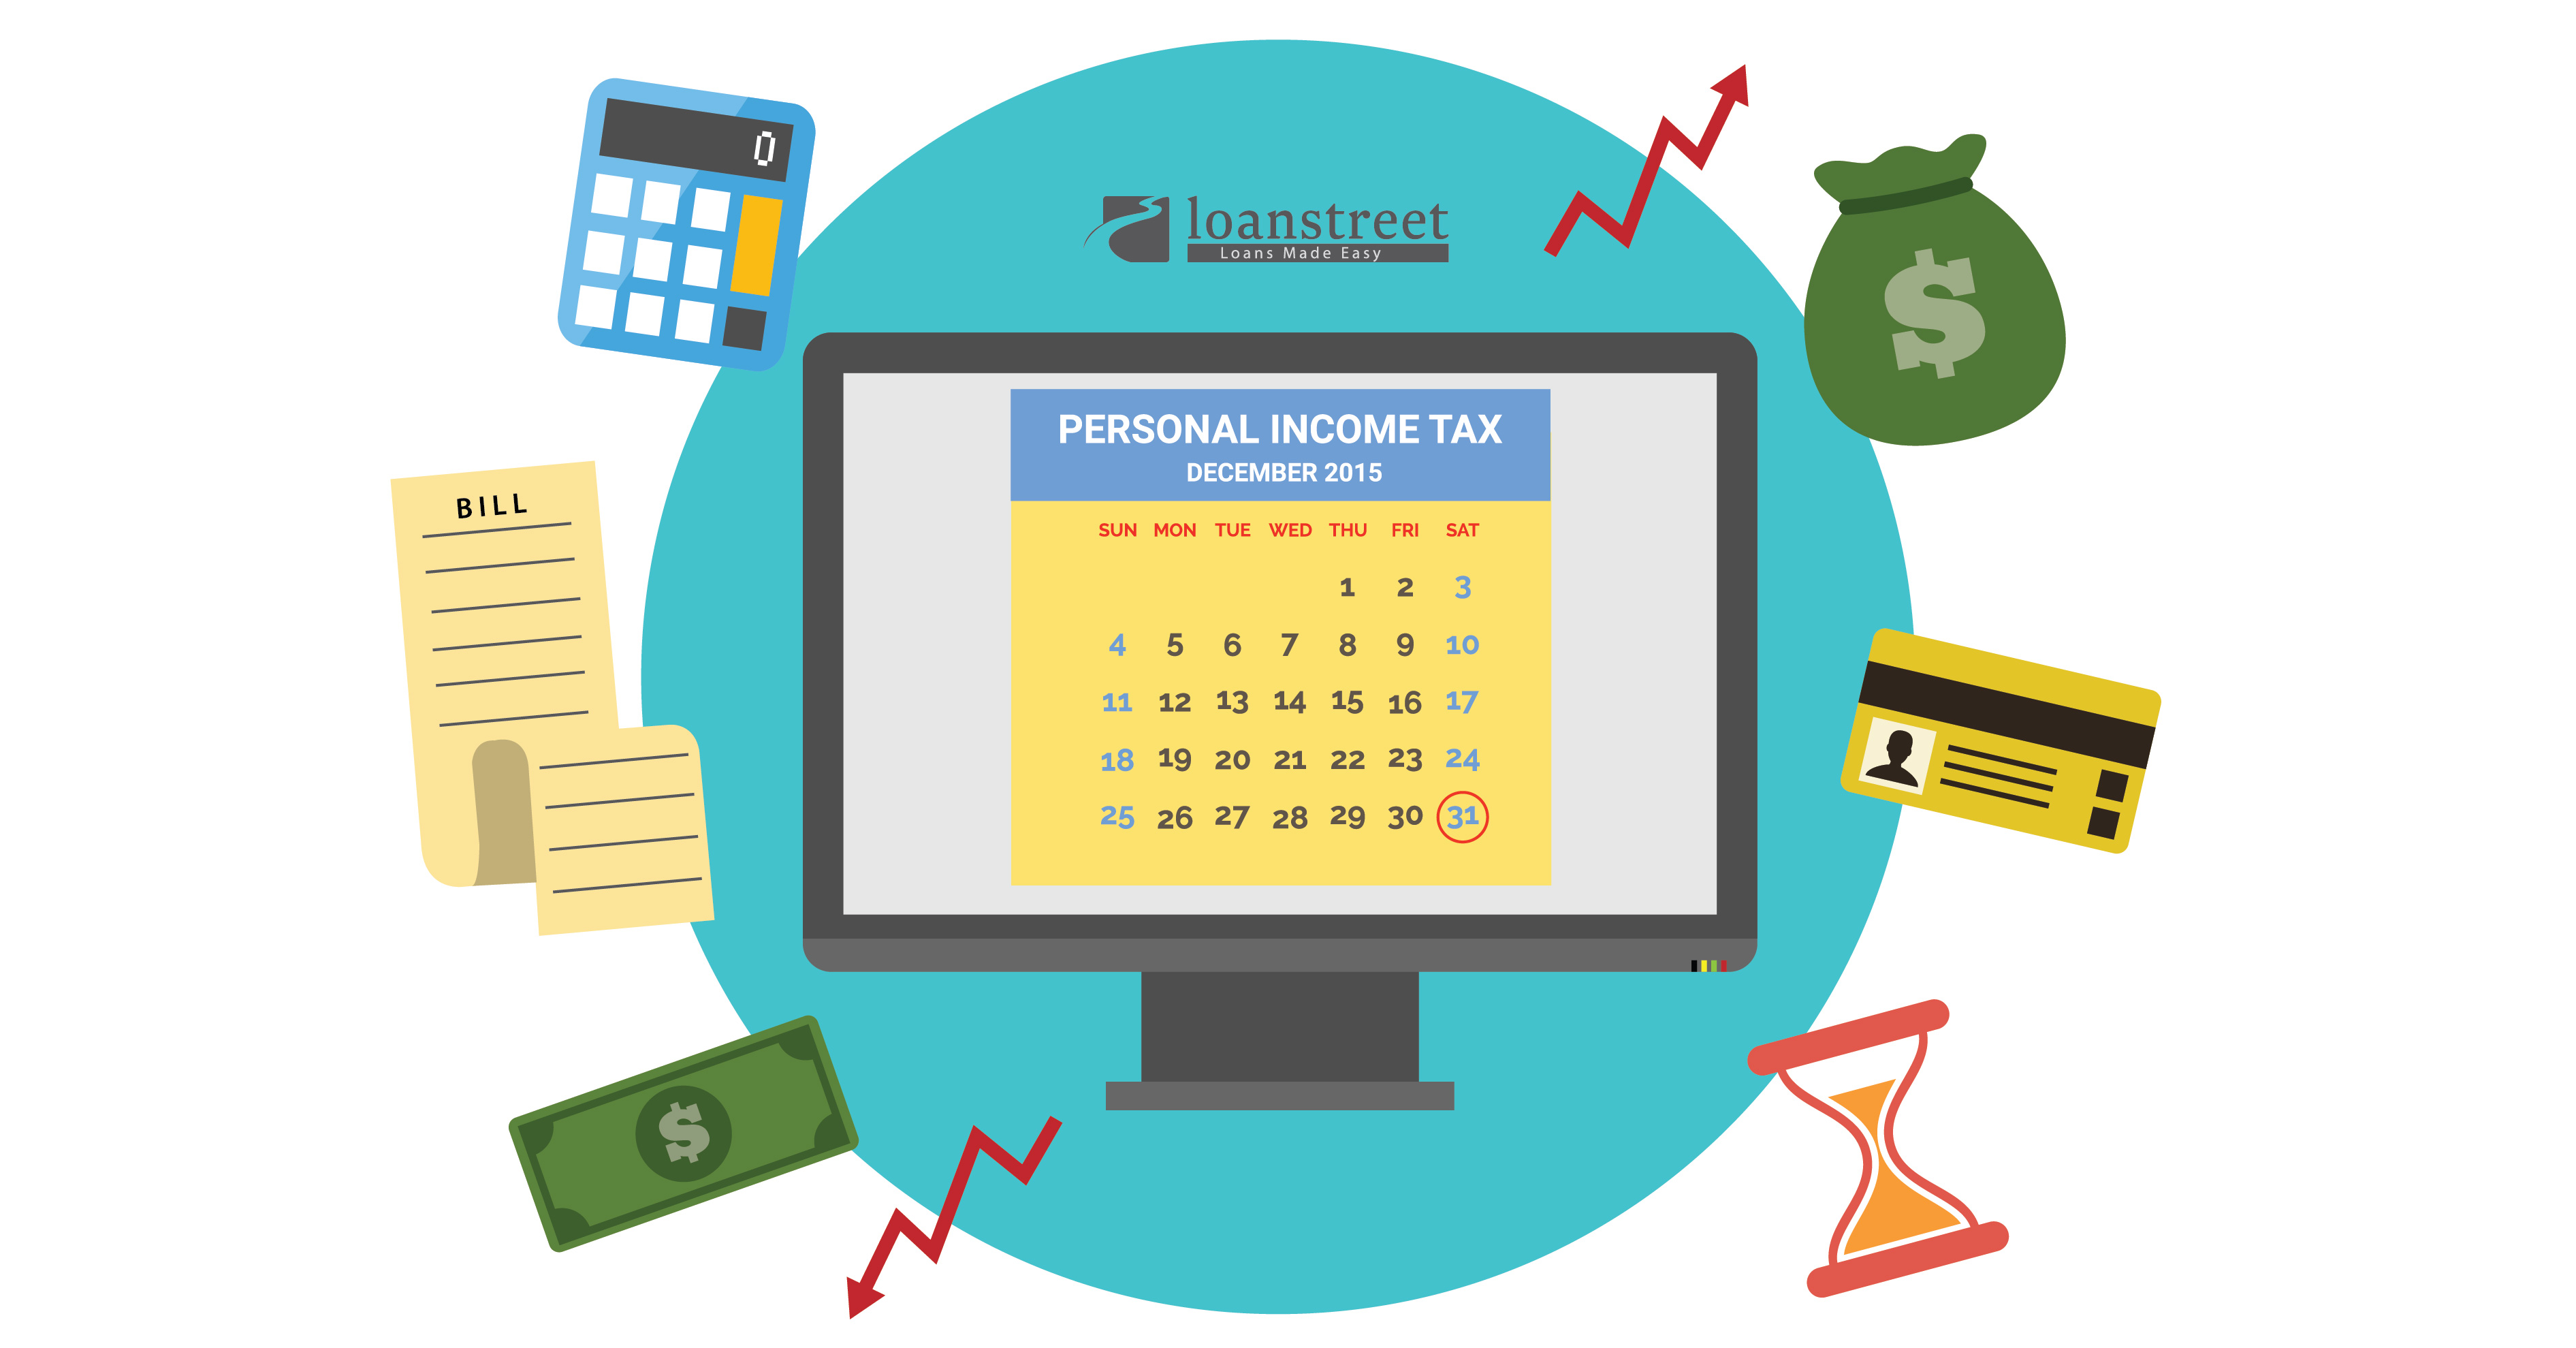 What is the personal income tax? Who must pay the personal income tax?